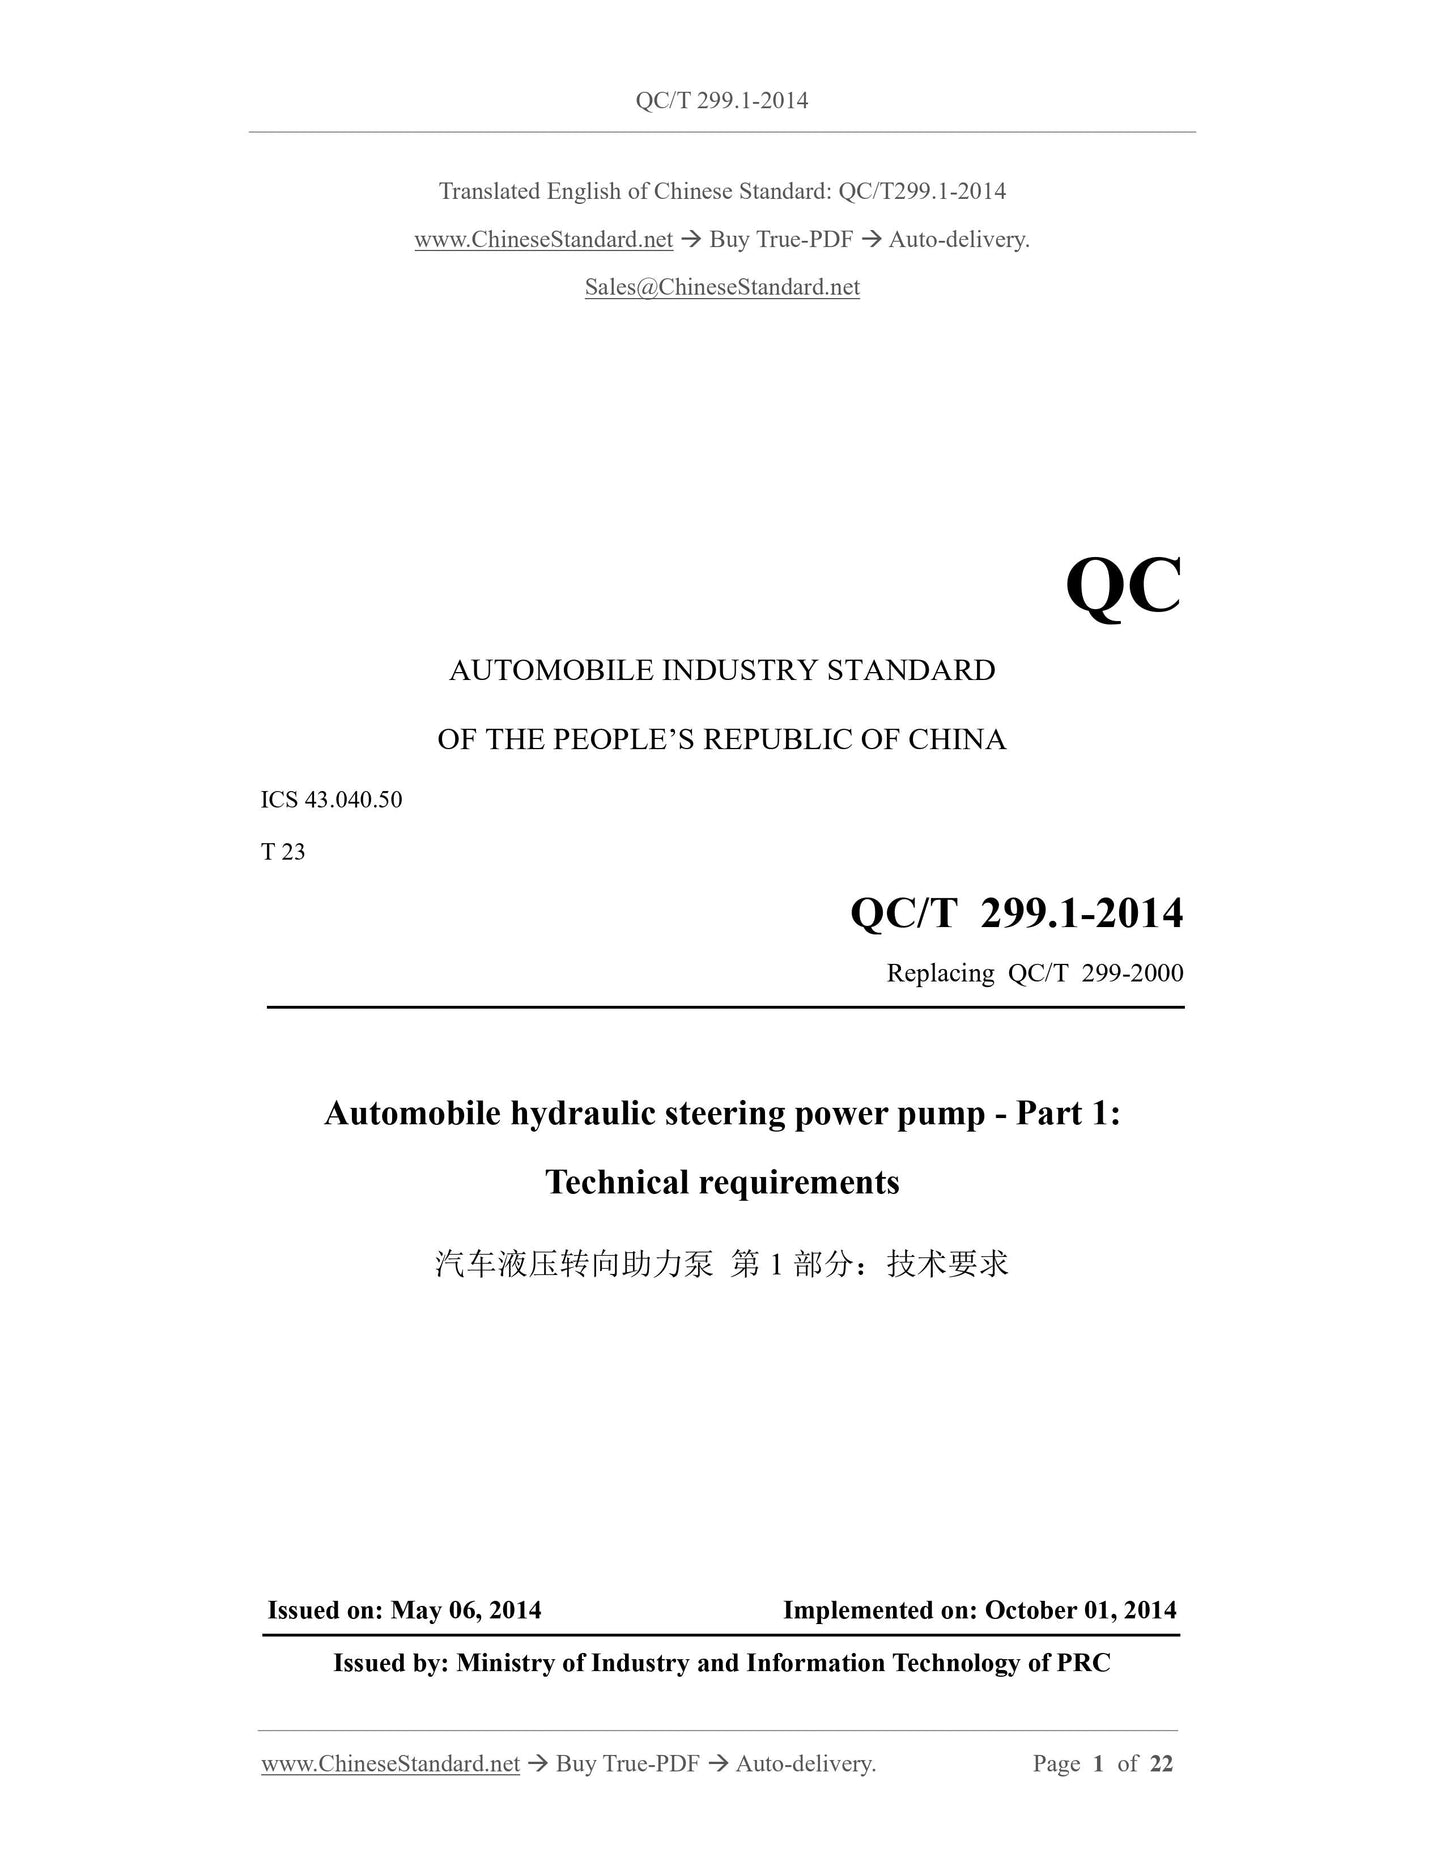 QC/T 299.1-2014 Page 1